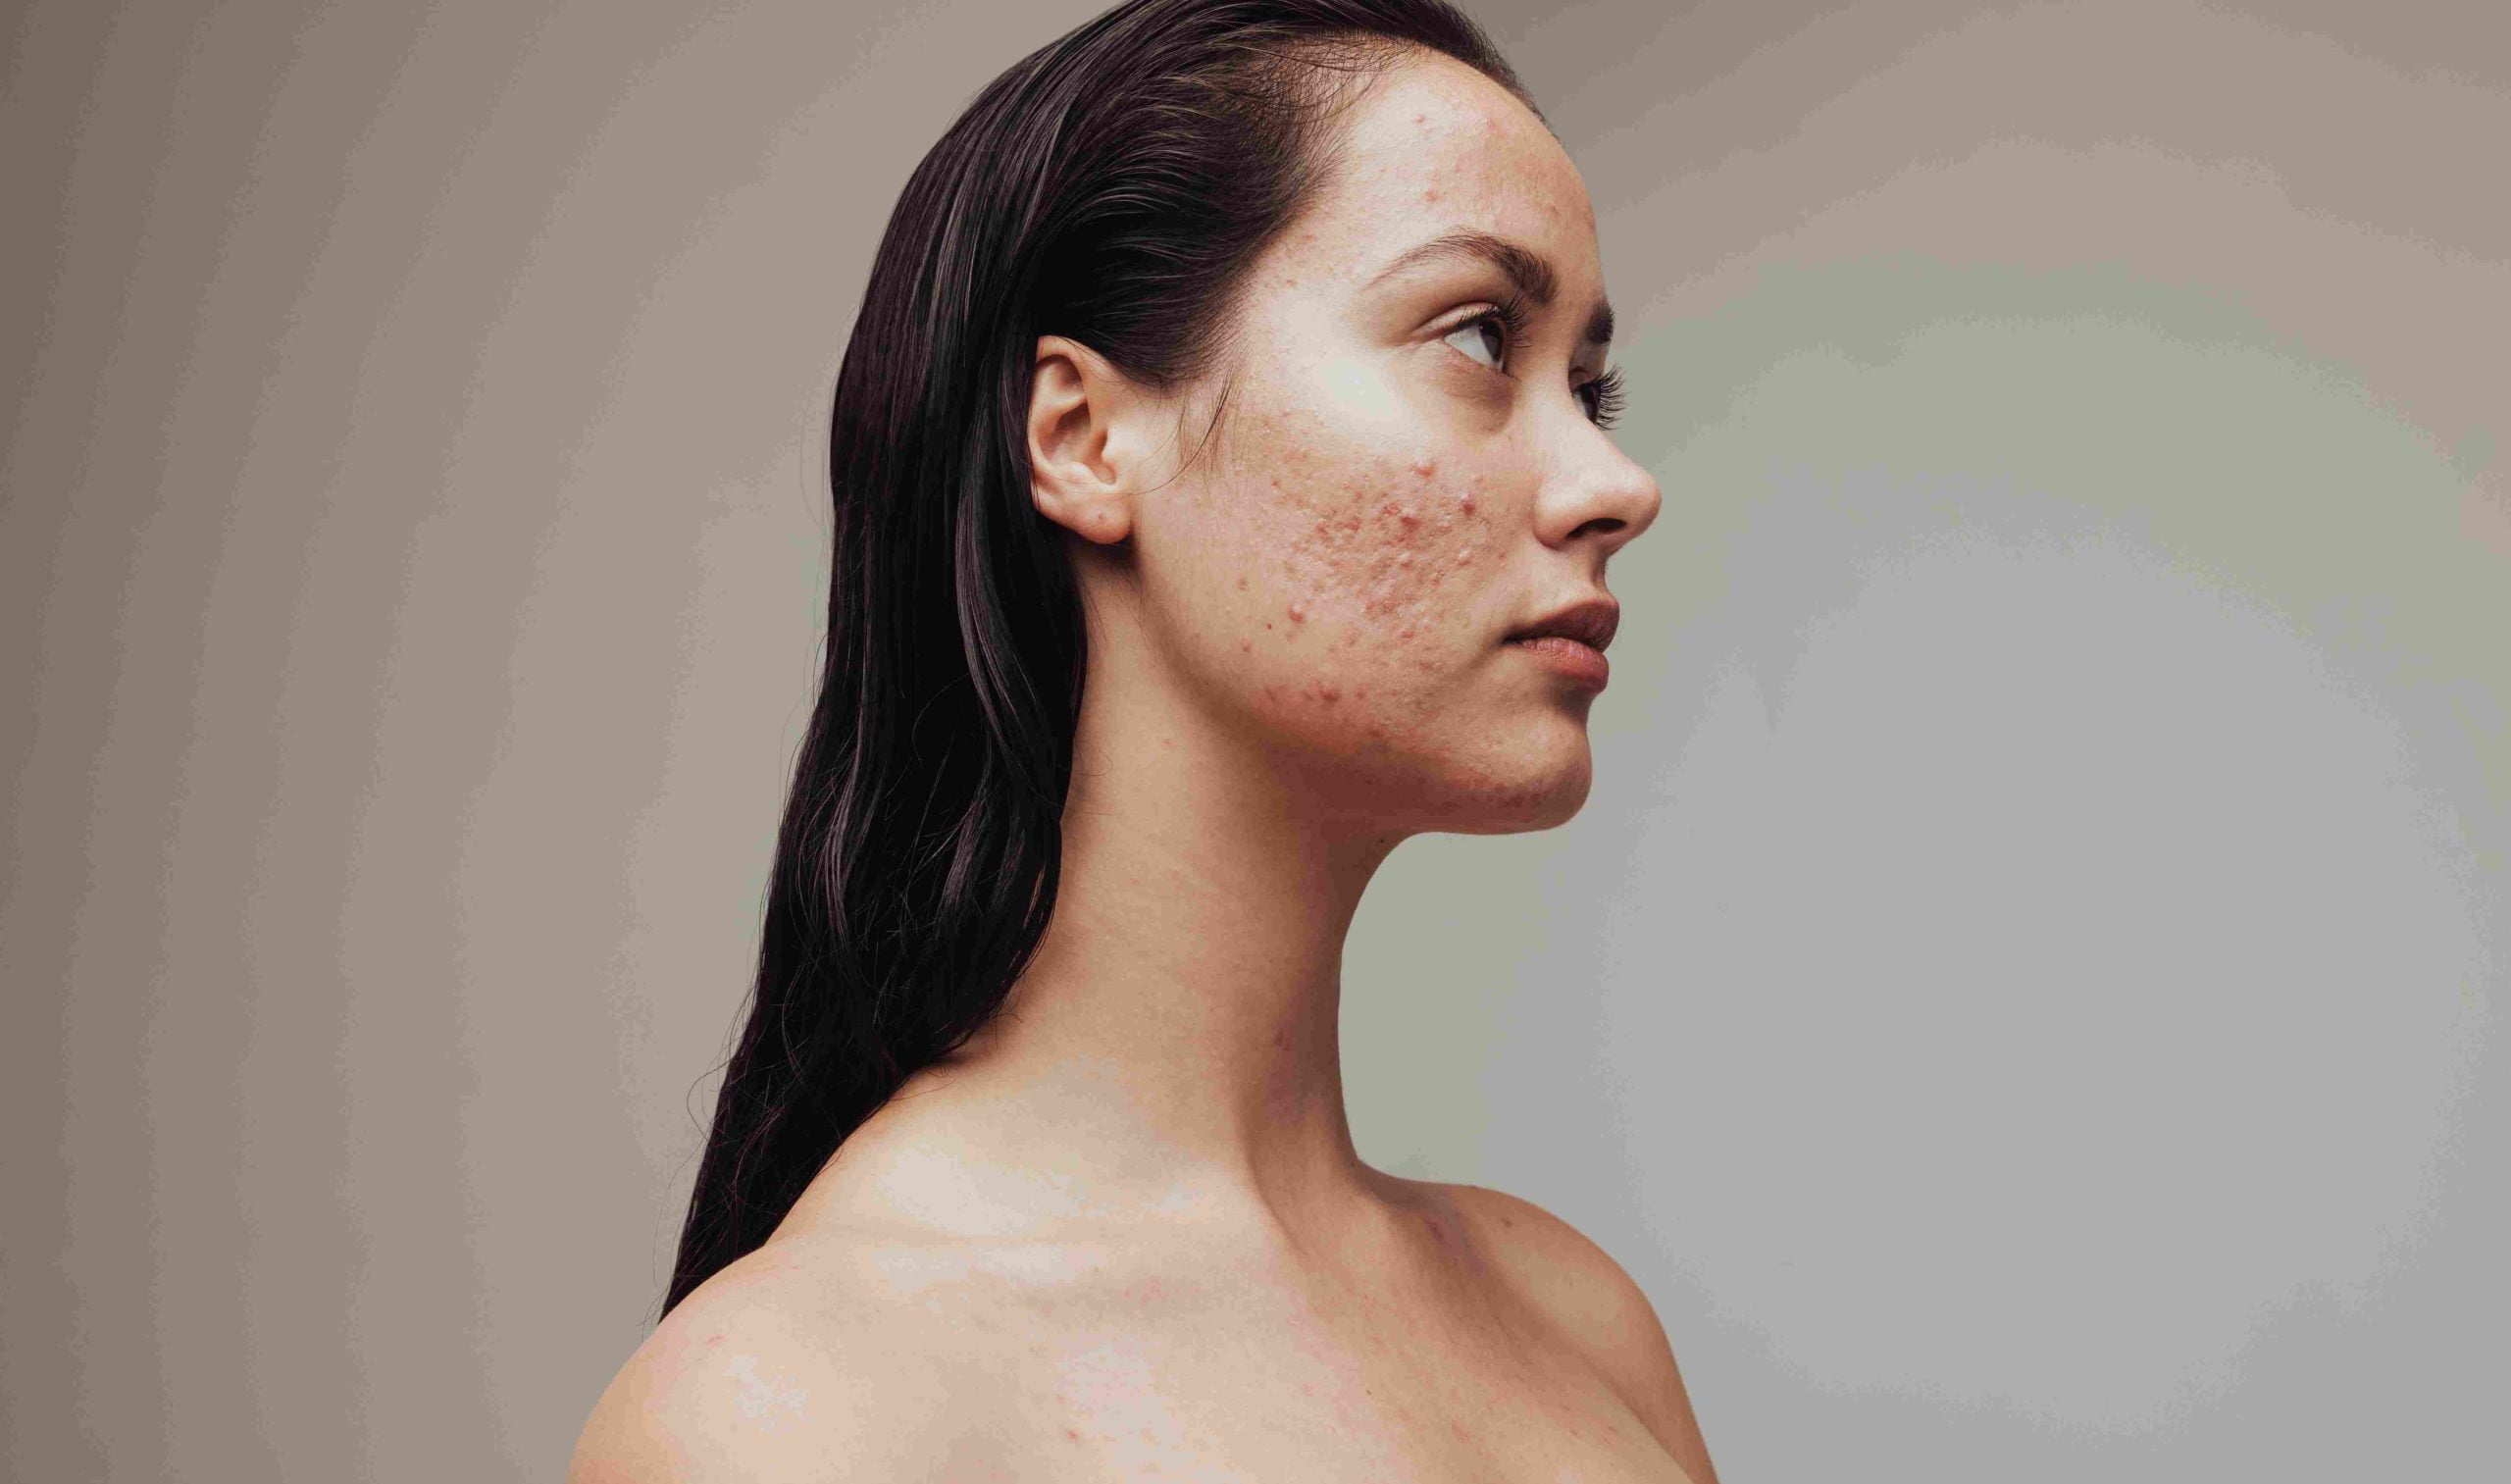 A Woman with Sad by acne on her face | Acne + Acne Scarring | Avail Aesthetics in Cary, Raleigh & Wake Forest, NC